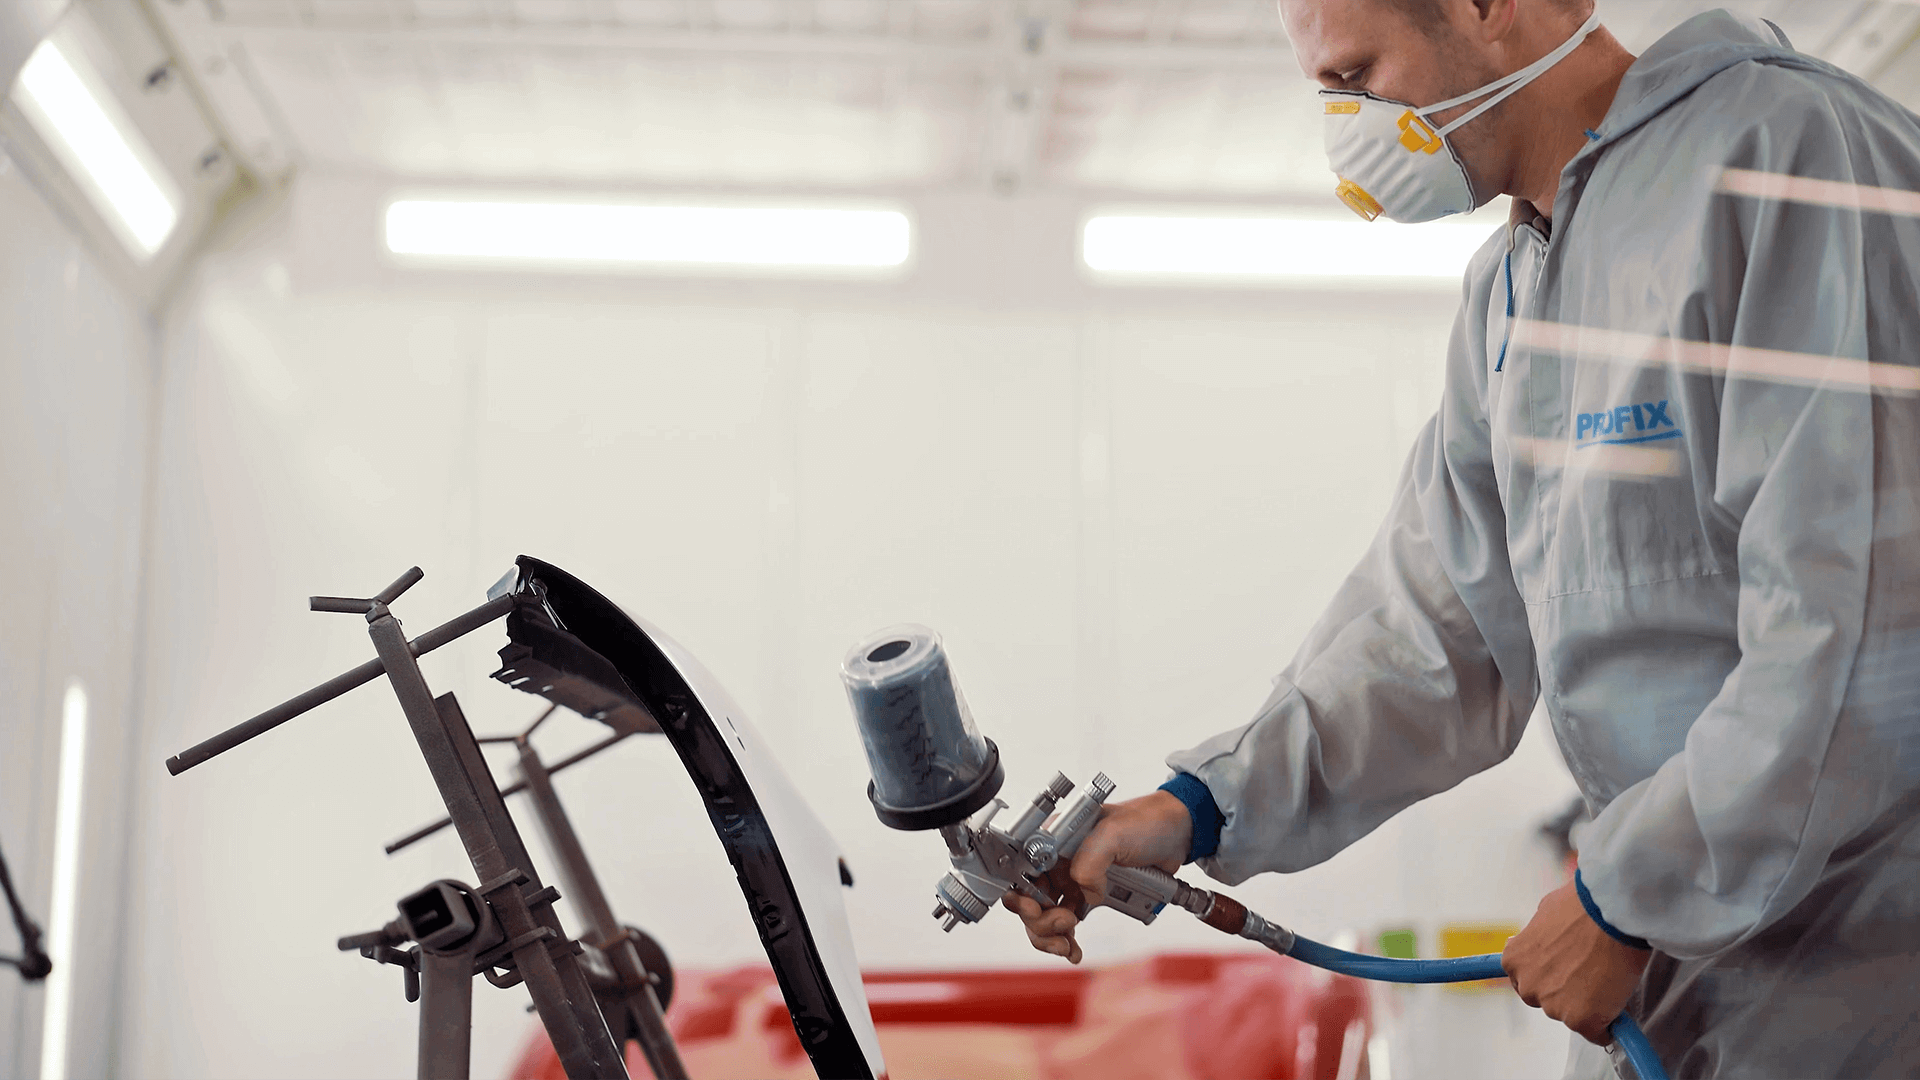 painting the car part with a spray gun 